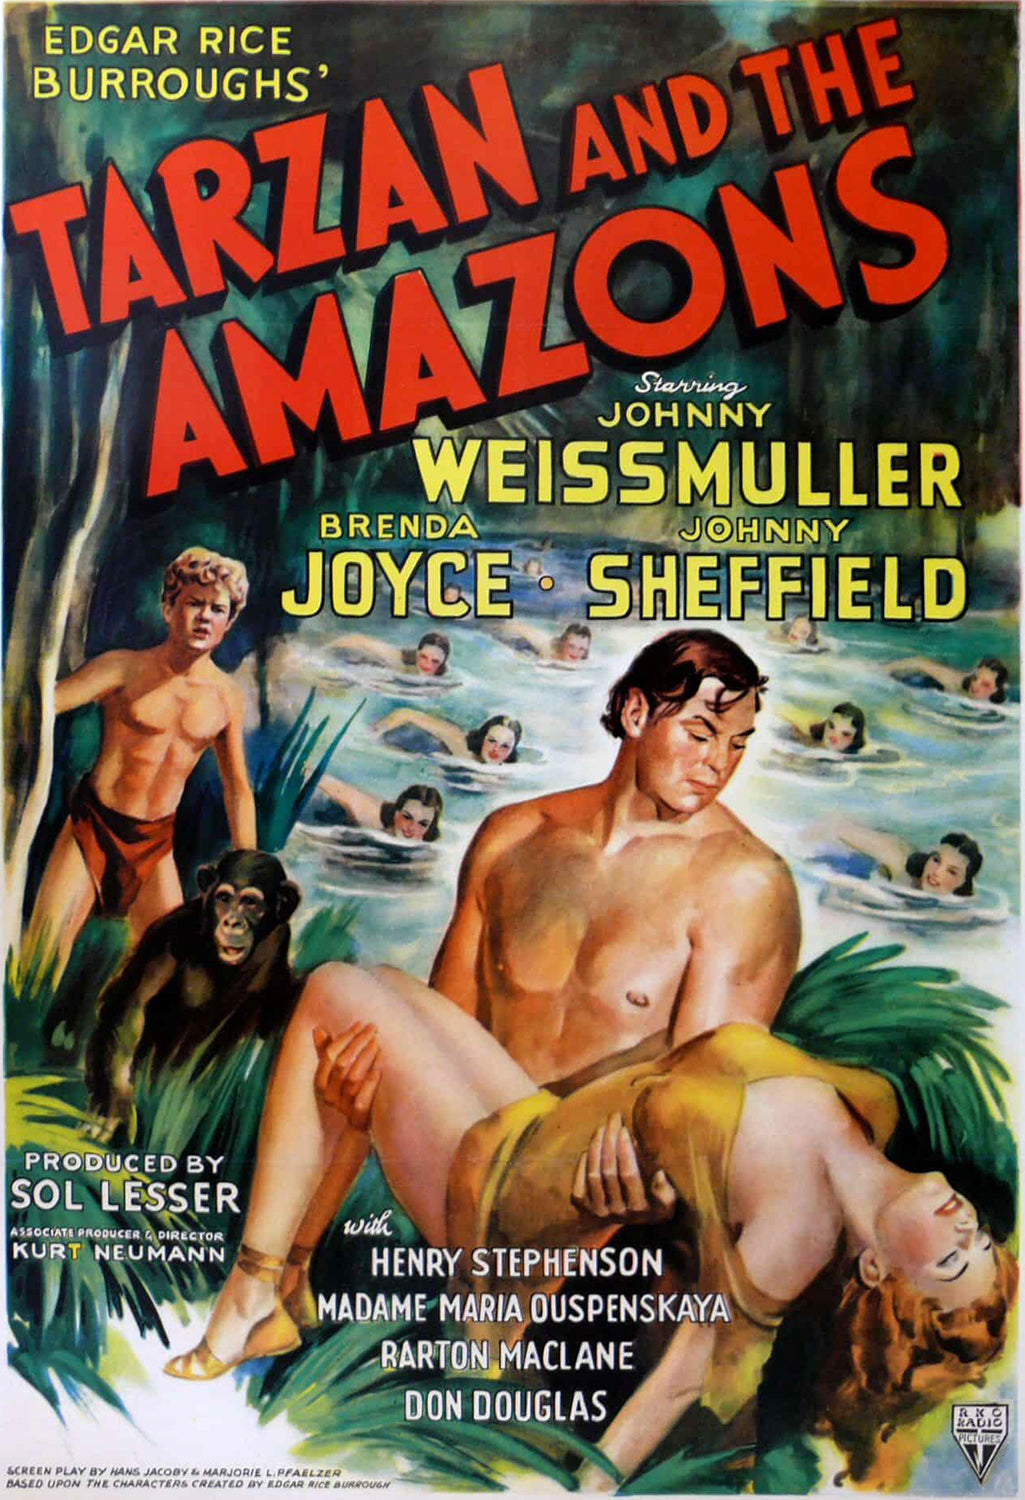 Tarzan and The Amazons (1945) Vintage Film Poster